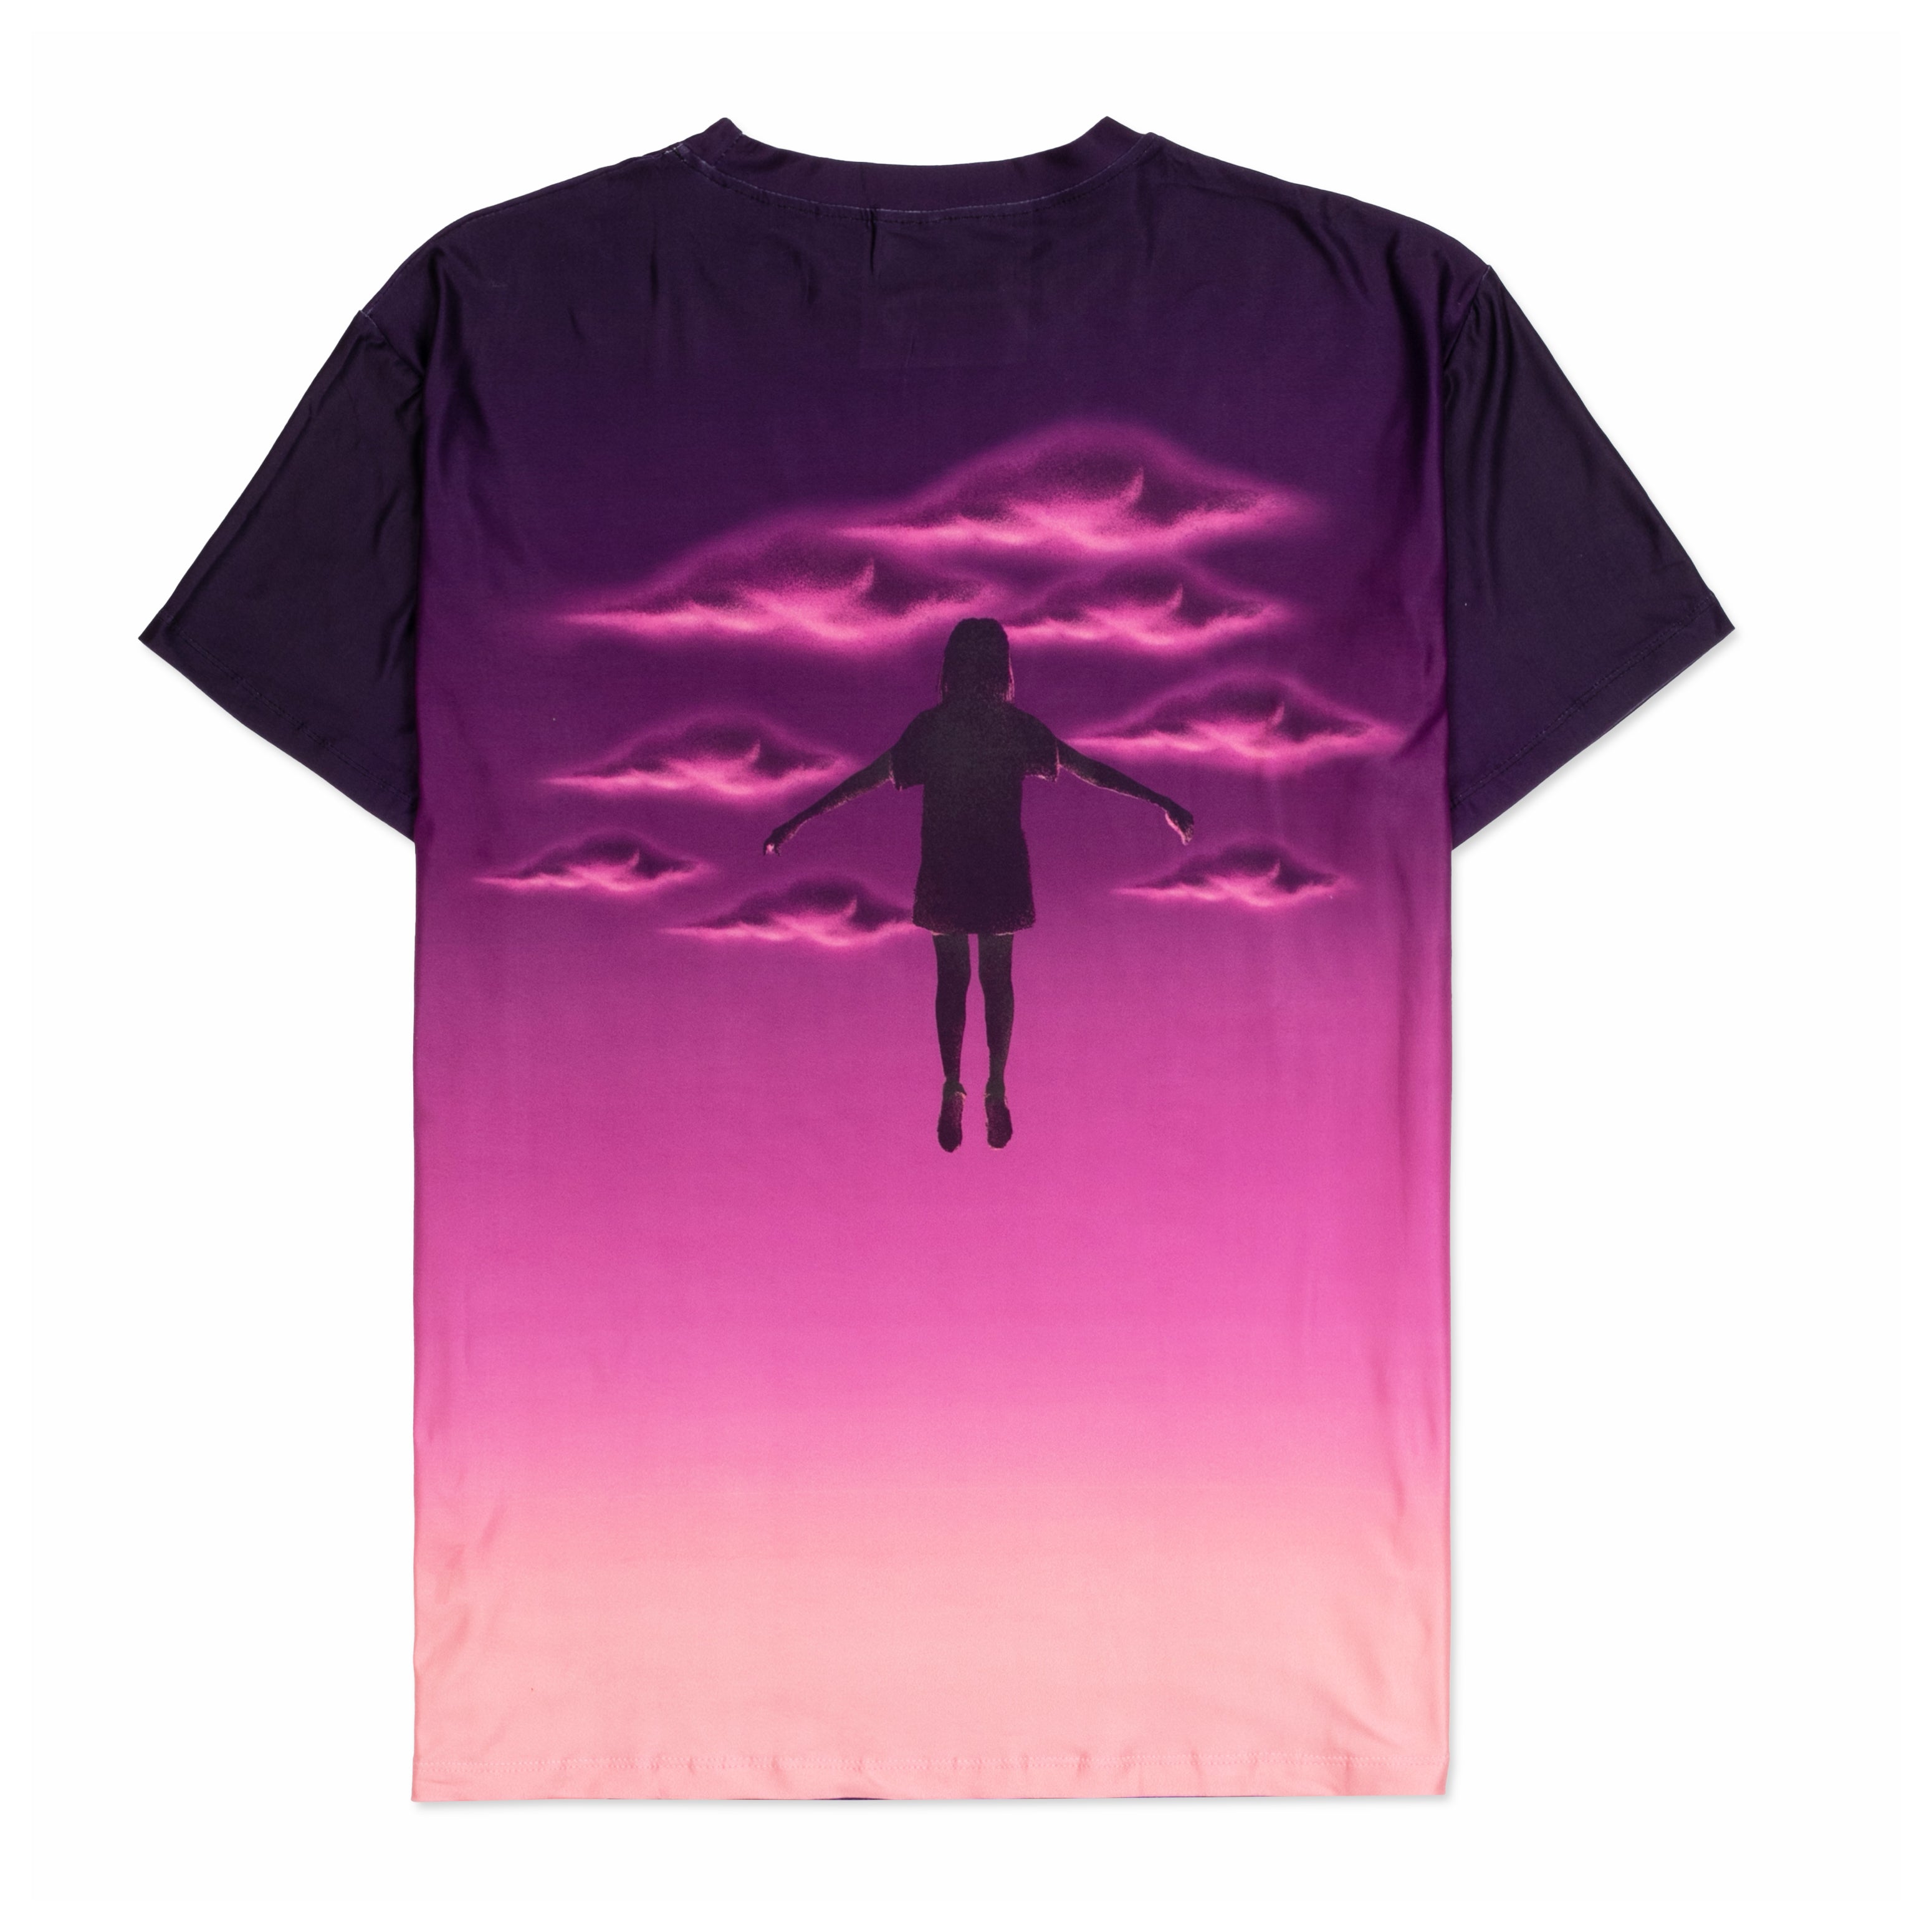 'LONER' Sublimated Tee